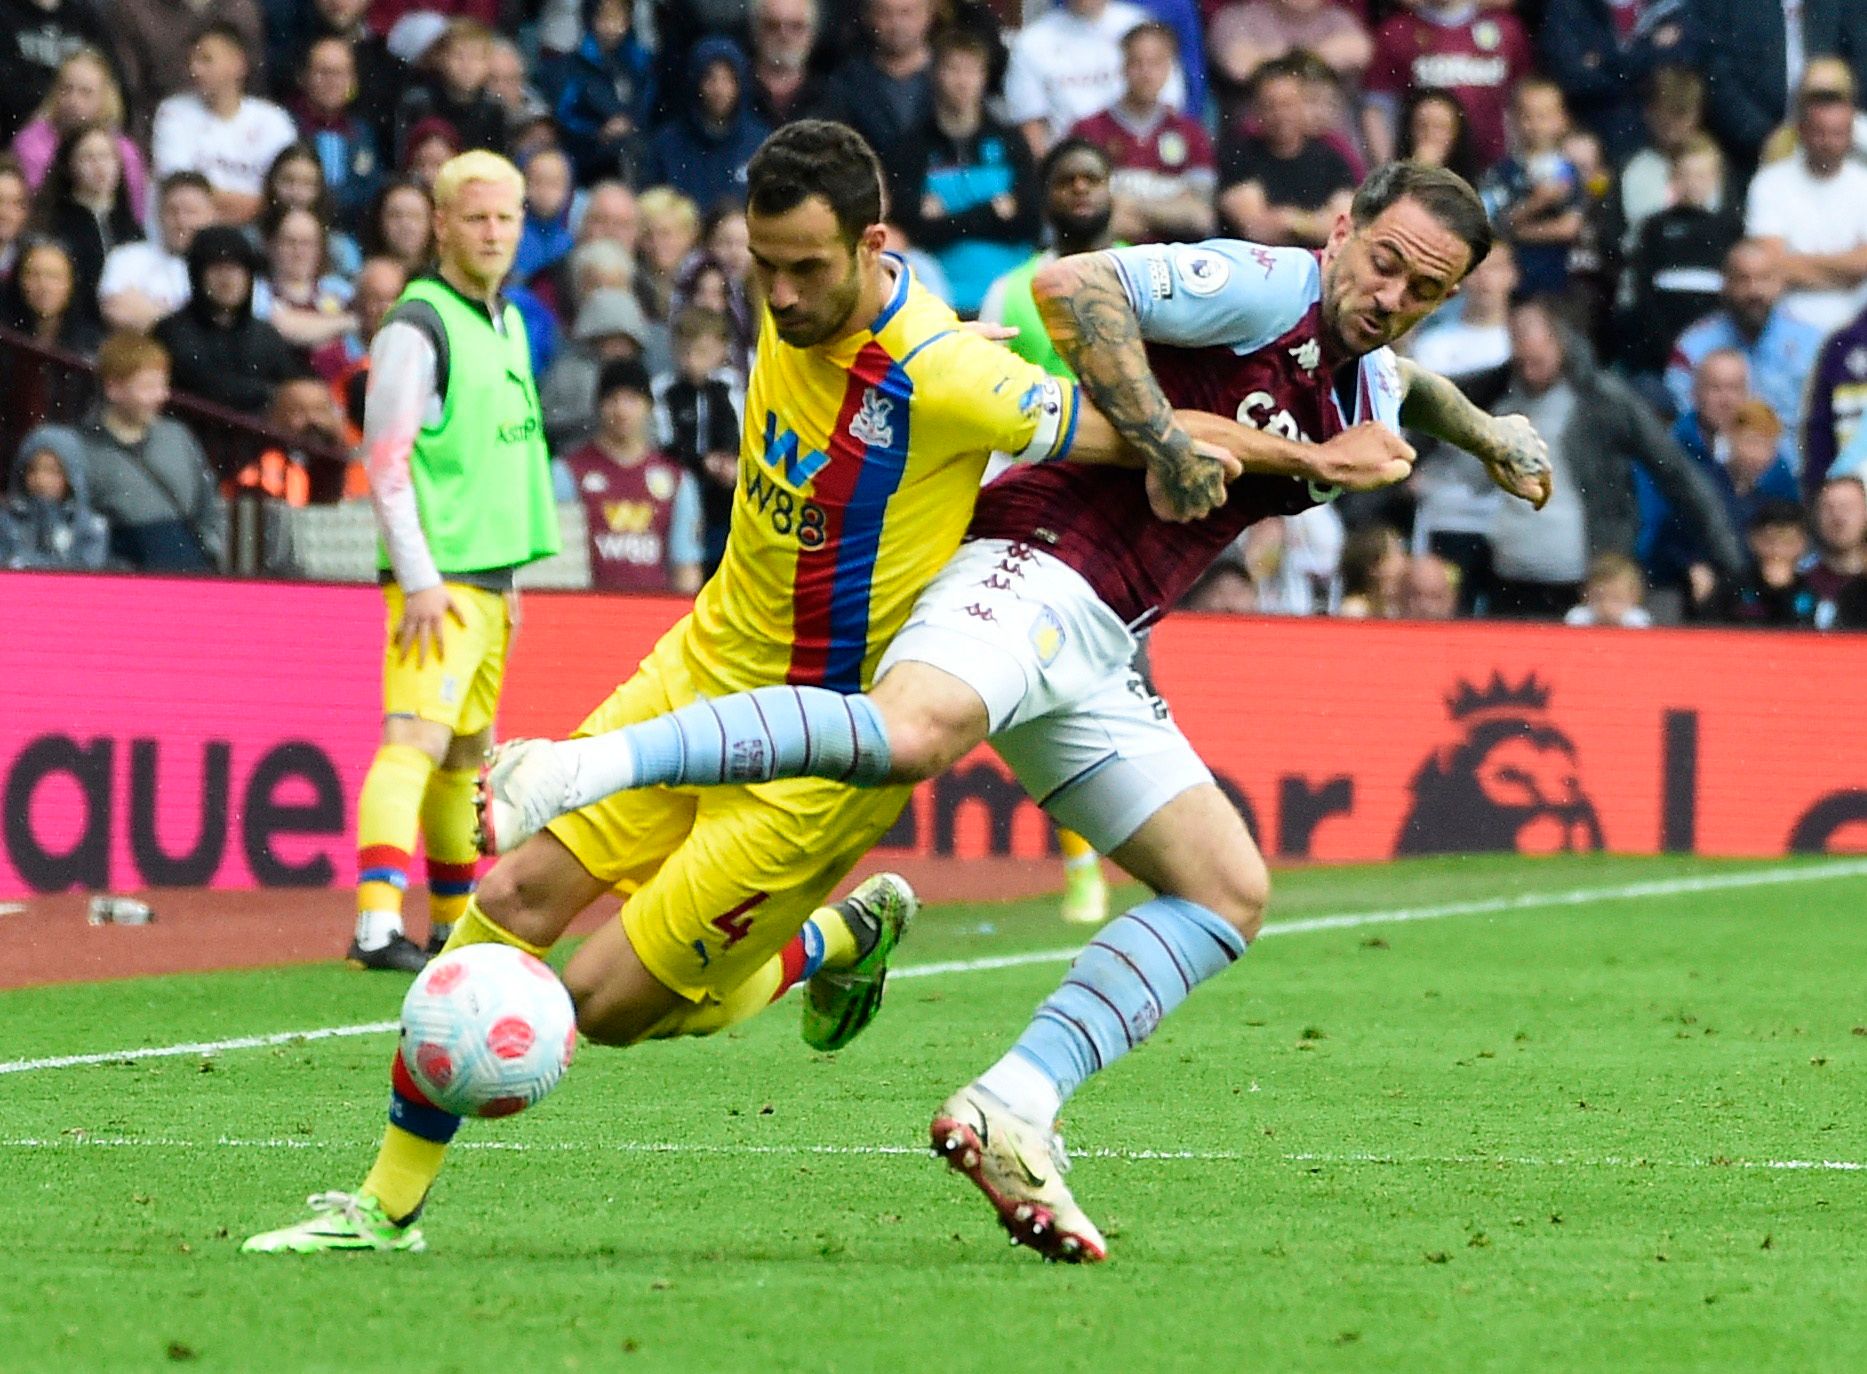 Soccer Football - Premier League - Aston Villa v Crystal Palace - Villa Park, Birmingham, Britain - May 15, 2022 Crystal Palace's Luka Milivojevic in action with Aston Villa's Danny Ings REUTERS/Rebecca Naden EDITORIAL USE ONLY. No use with unauthorized audio, video, data, fixture lists, club/league logos or 'live' services. Online in-match use limited to 75 images, no video emulation. No use in betting, games or single club /league/player publications.  Please contact your account representativ